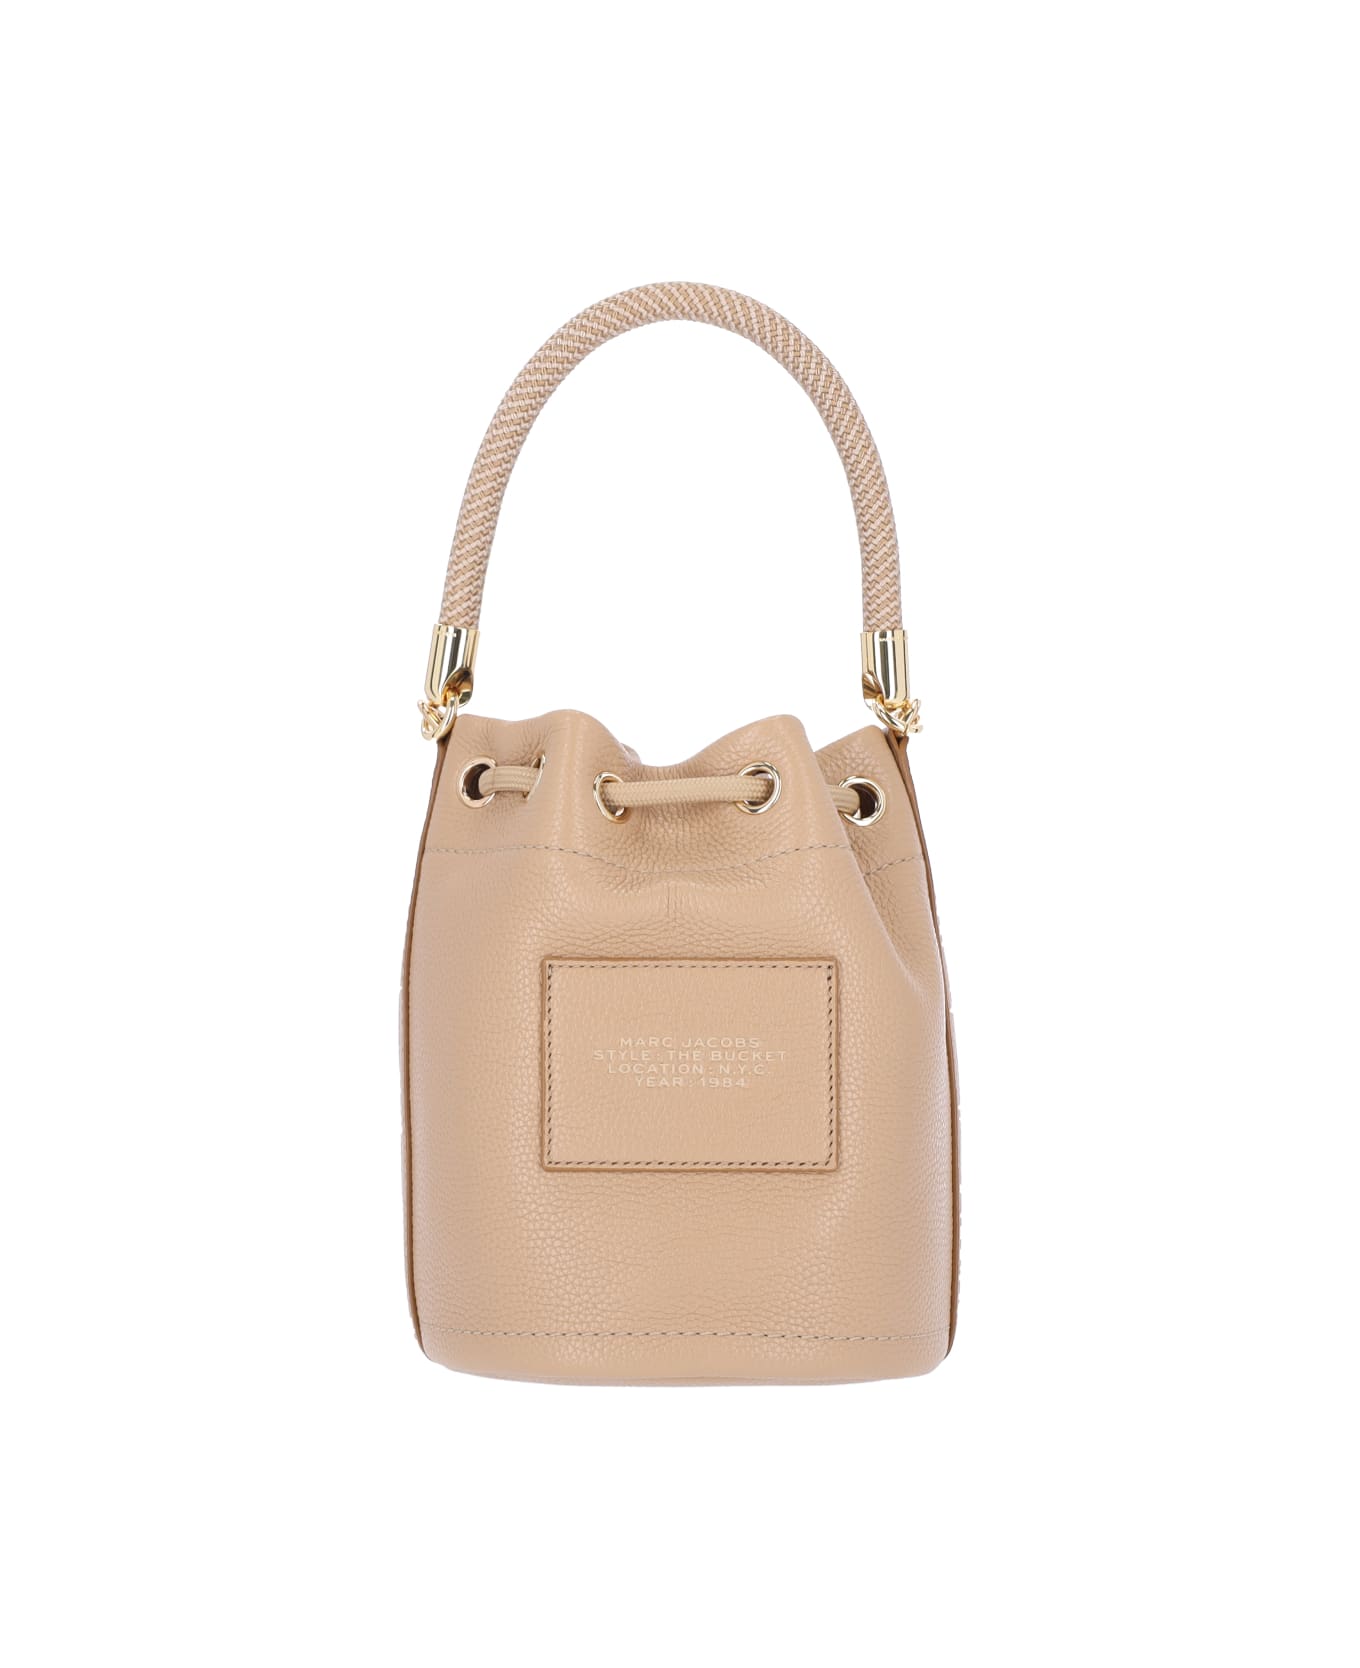 Marc Jacobs The Leather Bucket Bag - Beige